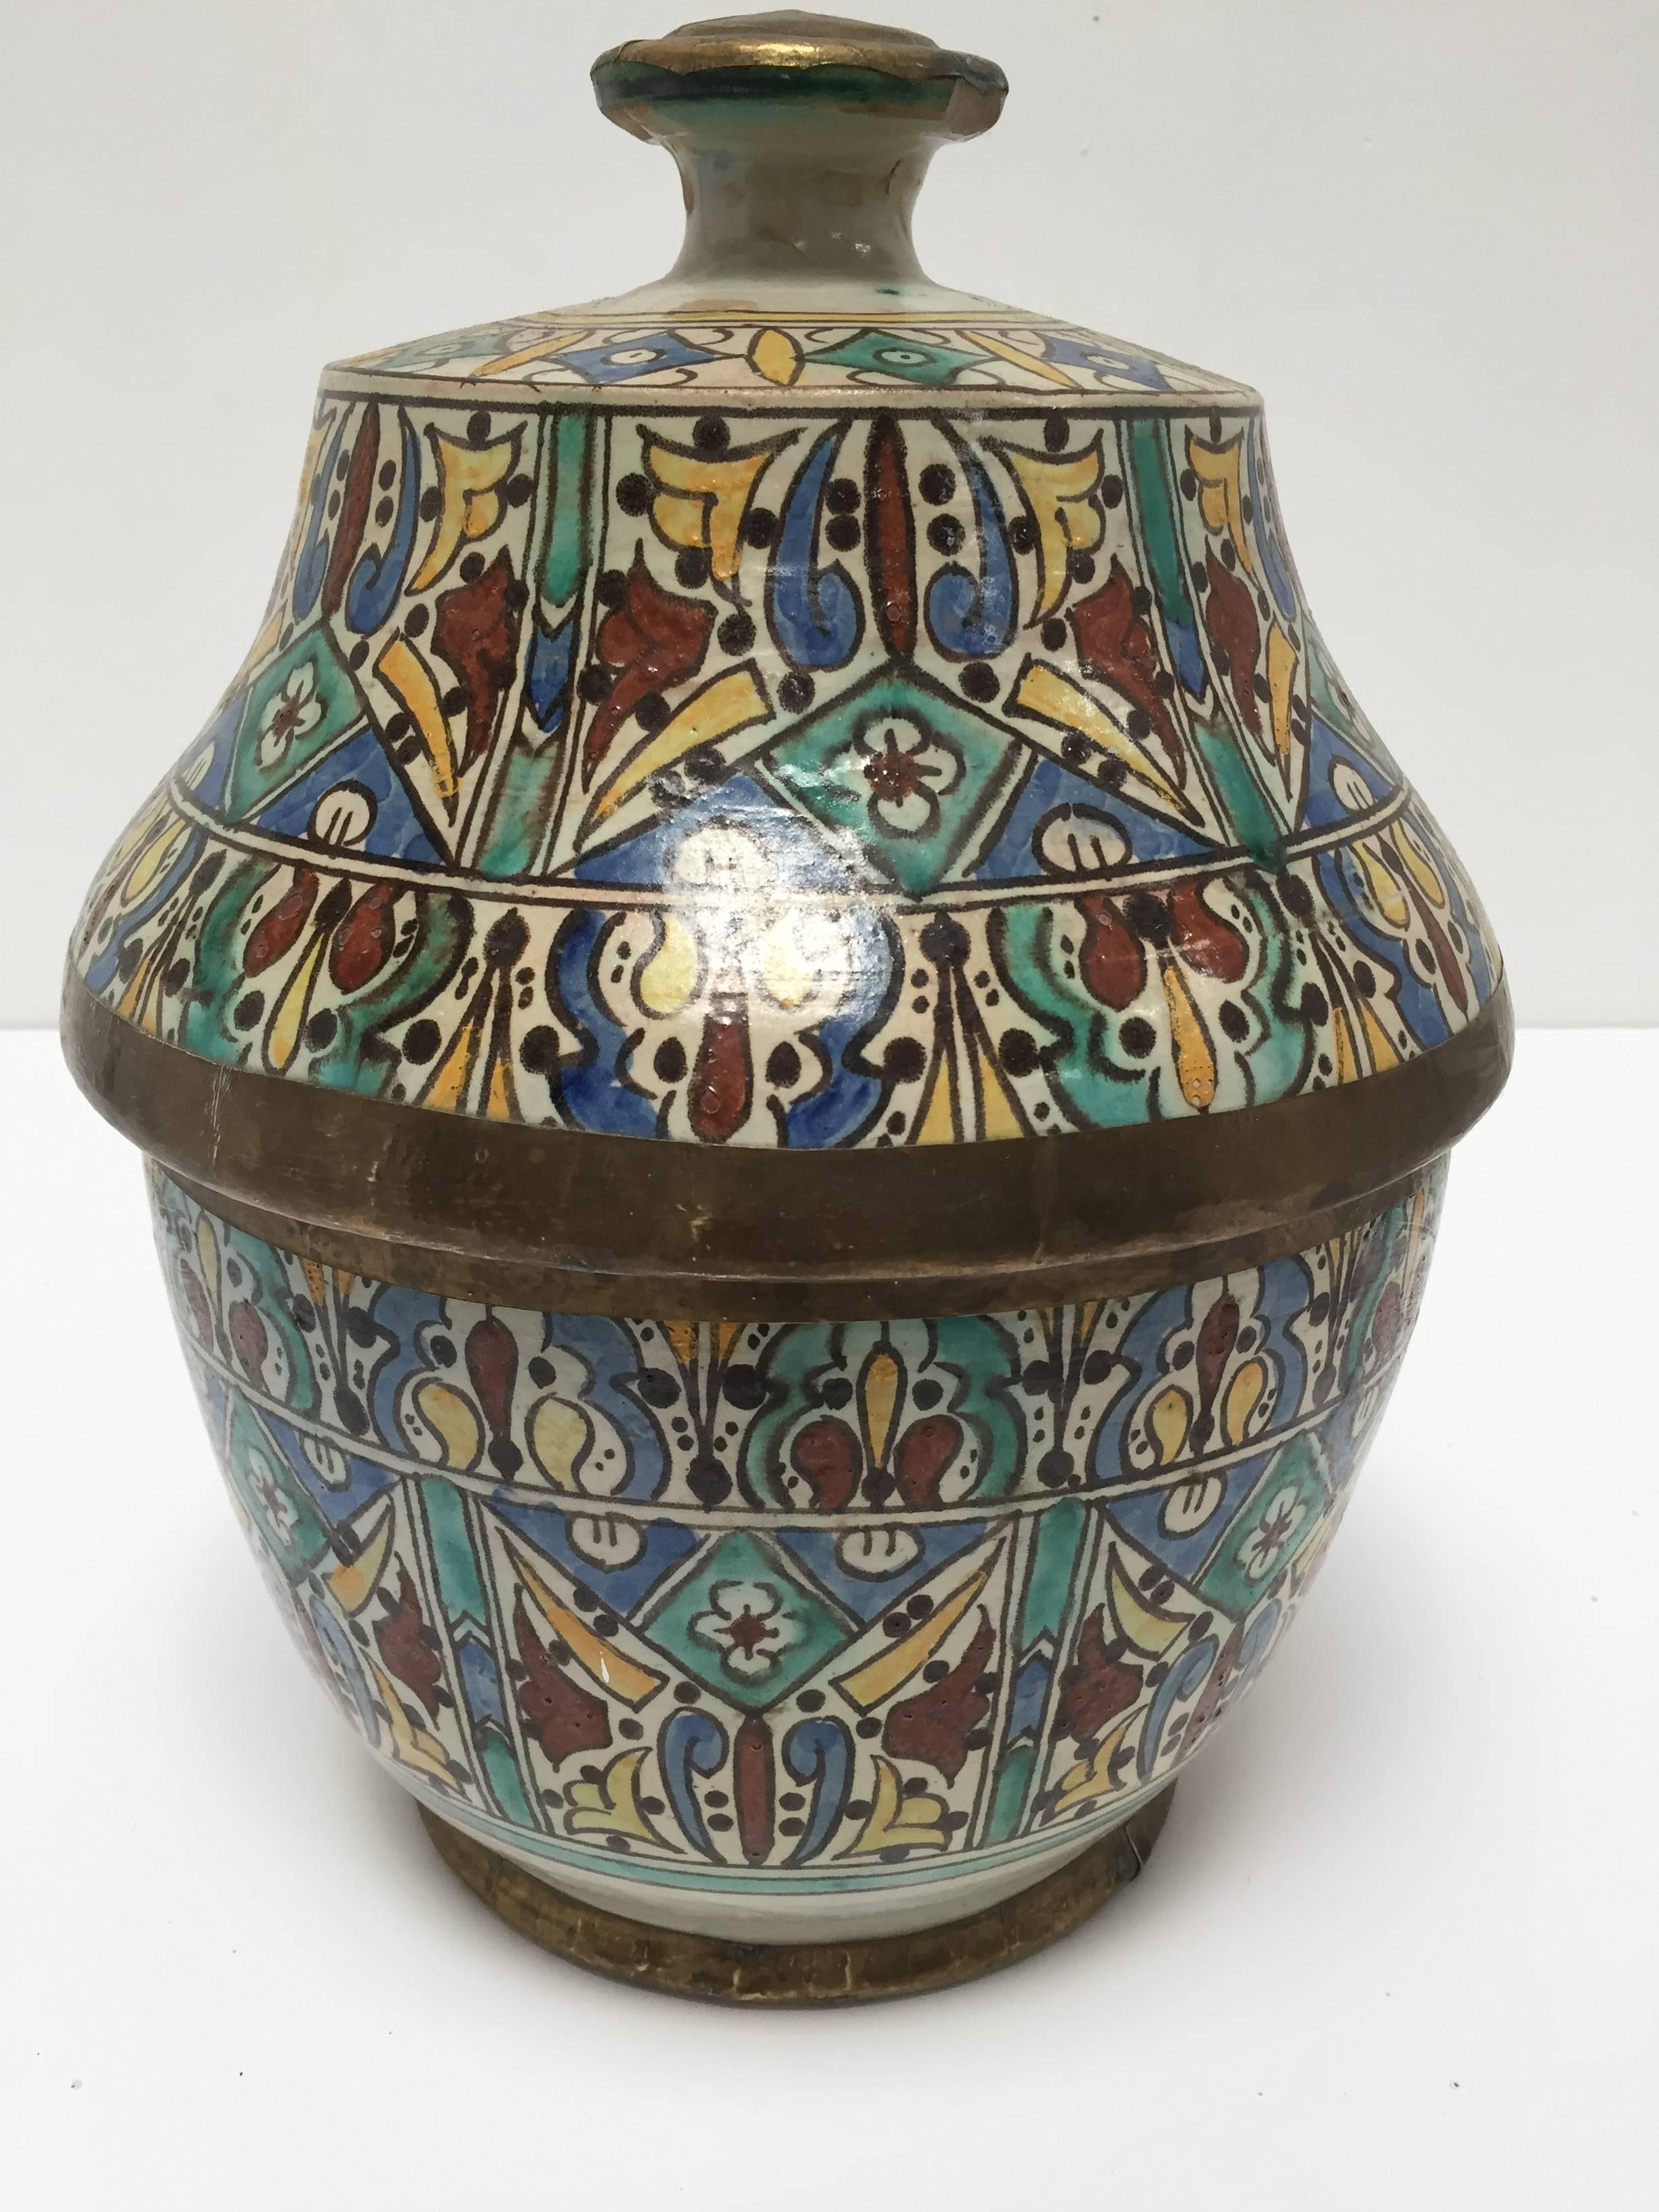 Large Moroccan glazed polychrome ceramic jar tureen with cover.
Hand painted ceramic Jubbana, handcrafted by skilled Moroccan artisans in Fez Morocco.
Moorish designs in turquoise, blue, saffron yellow, prune and ivory color with brass decorated